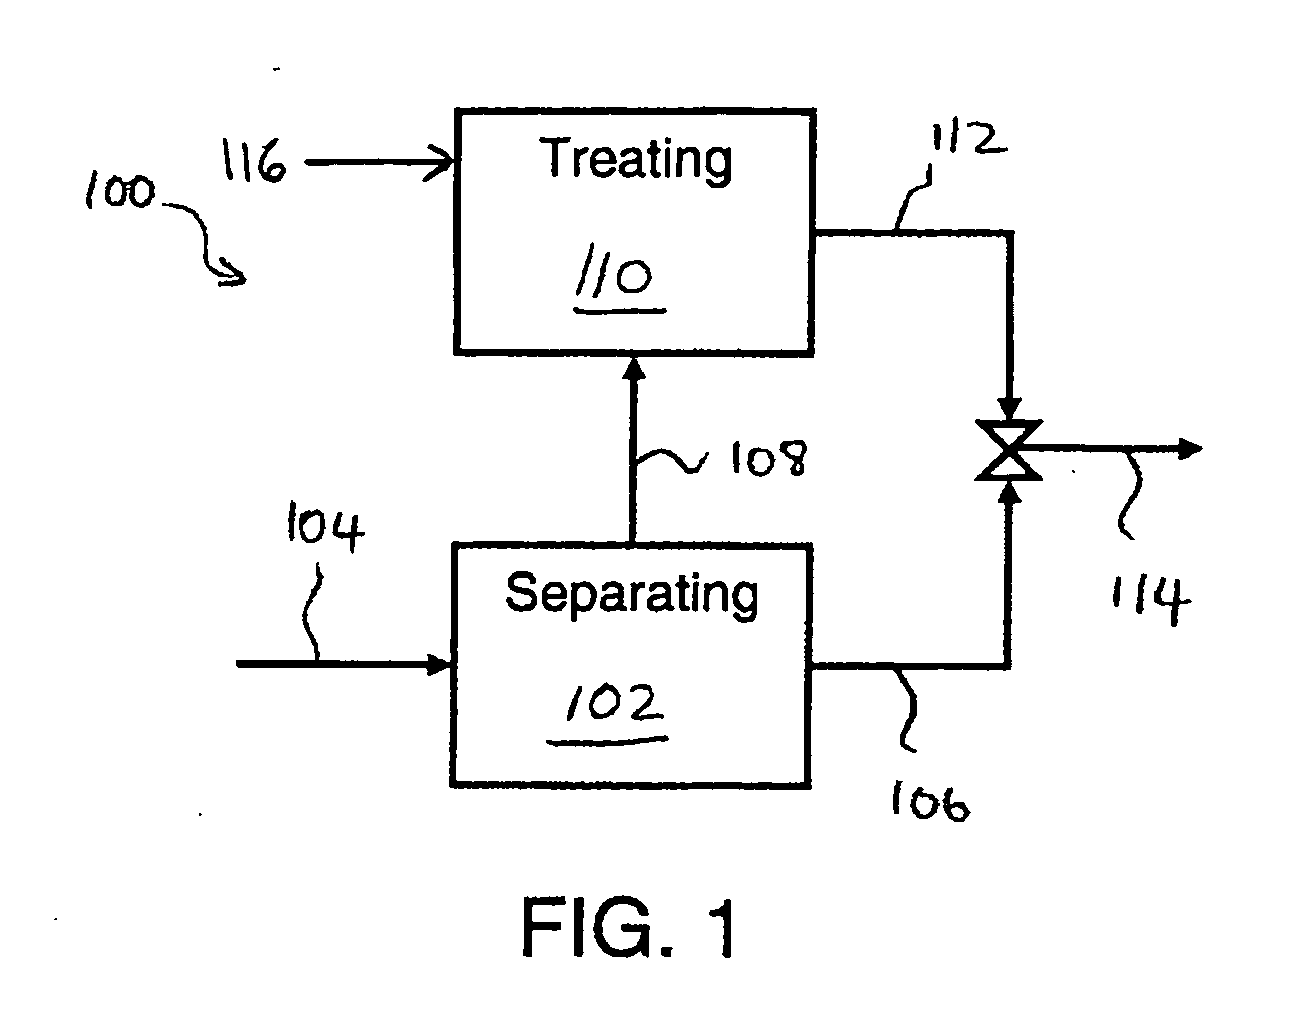 Process for treating a heavy hydrocarbon feedstock and a product obtained therefrom